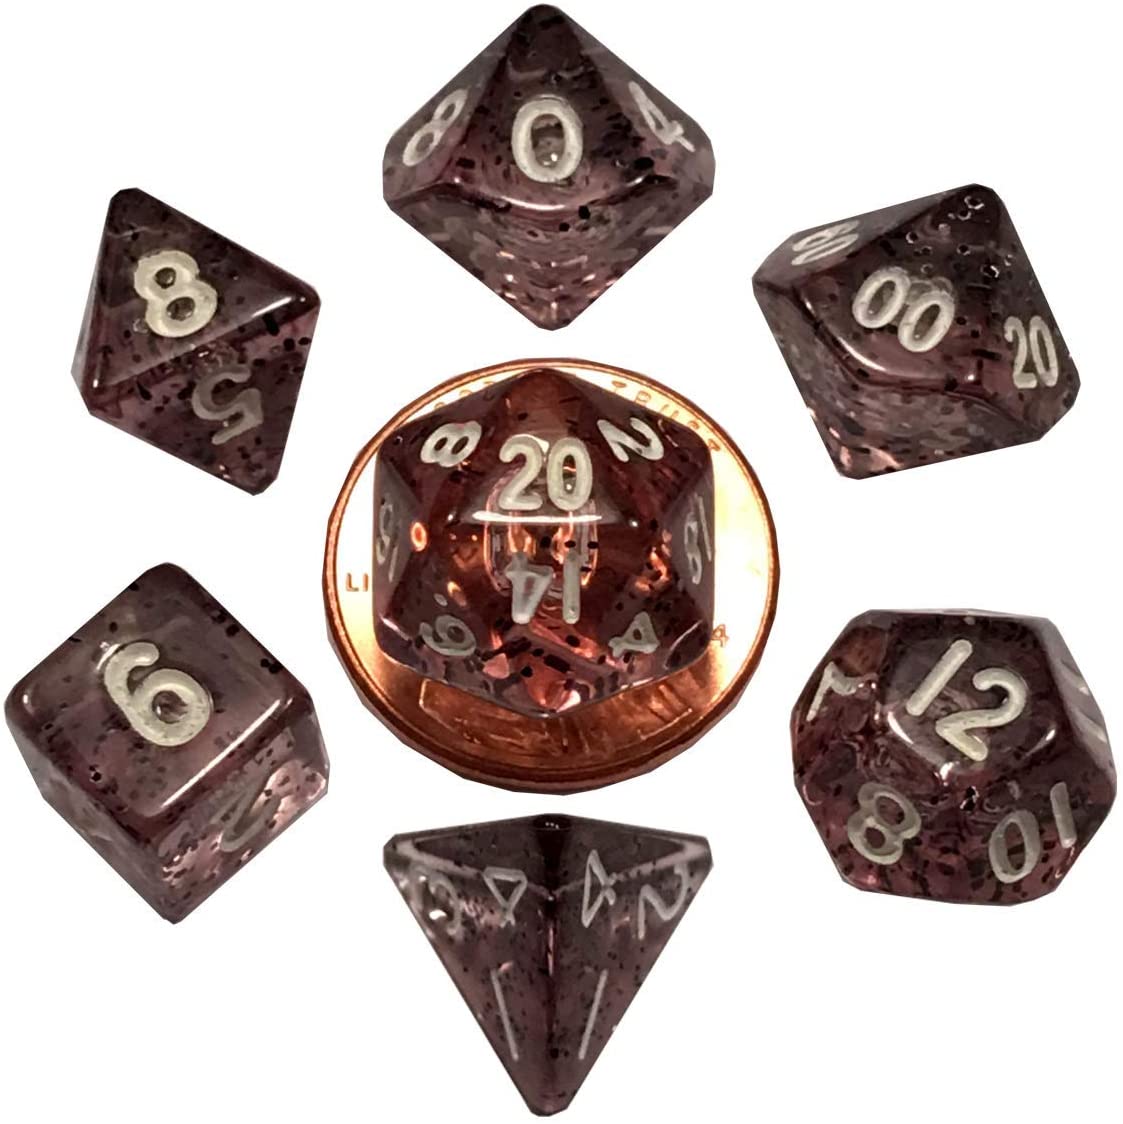 Ethereal Black?10mm Mini Polyhedral Dice Set